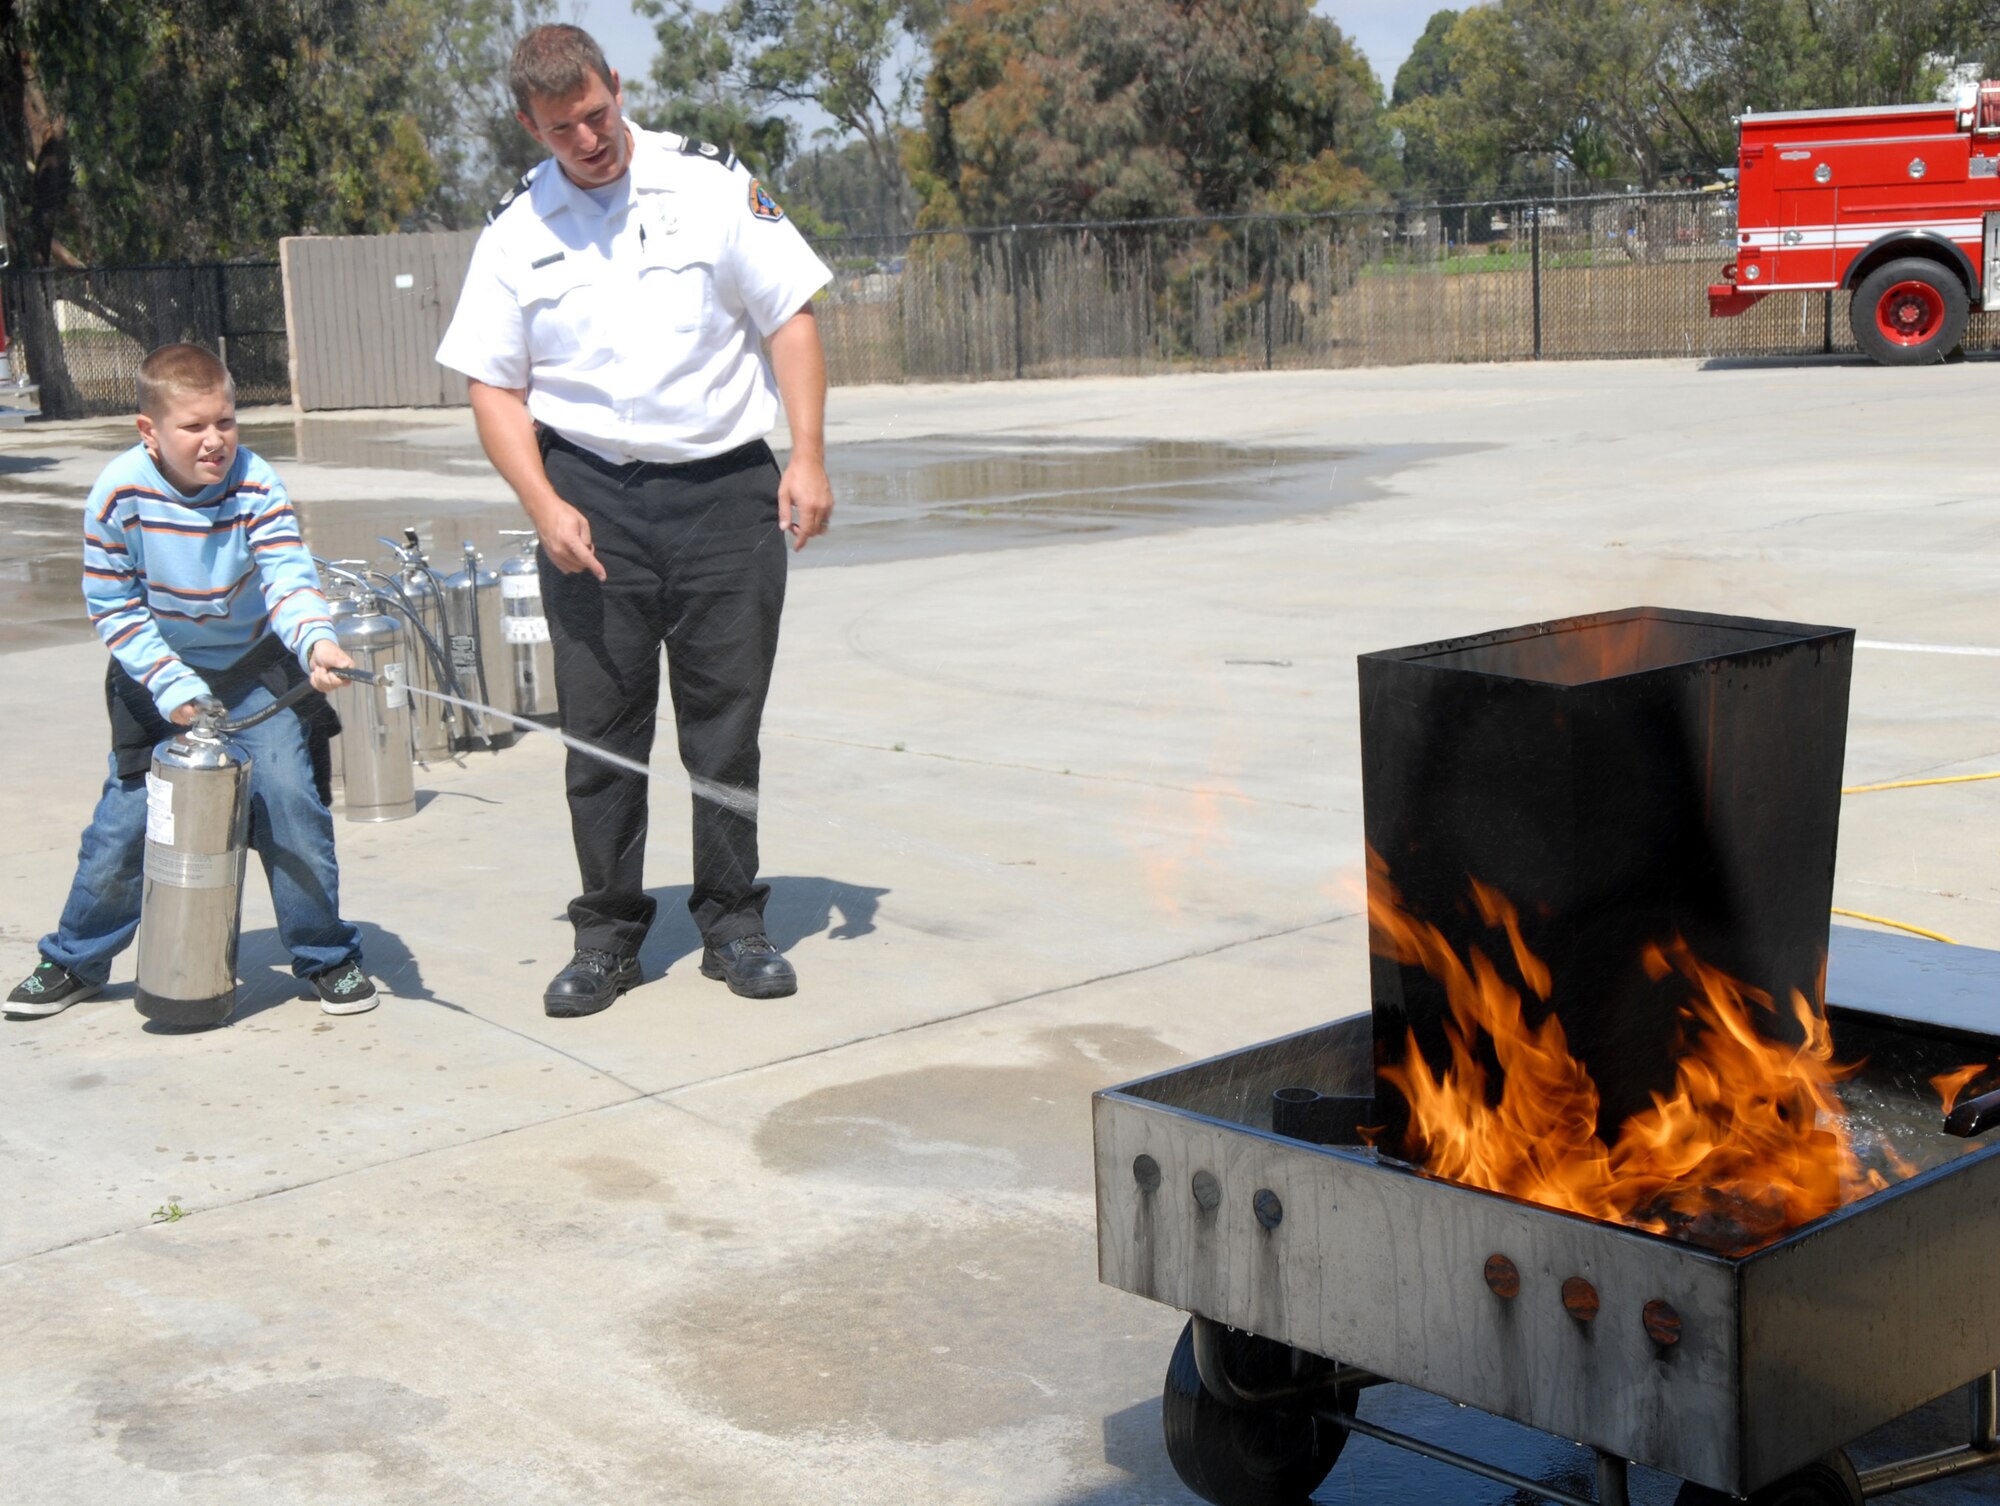 VANDENBERG AIR FORCE BASE, Calif. -- Teaching the "pull, aim, squeeze, sweep" method, Scott Balatgek, who is a 30th Civil Engineer Squadron fire inspector, teaches a Kids’ Fire Camp attendee how to use a fire extinguisher Aug. 15 at Fire Station 2 here. Besides fire extinguisher training, the children also had a chance to take a station tour to learn where and how firefighters live during their 24-hour shifts; receive smoke and fire safety training; and run an obstacle course that gave them a chance to use firefighter tools. (U.S. Air Force photo/Airman 1st Class Kerelin Molina)